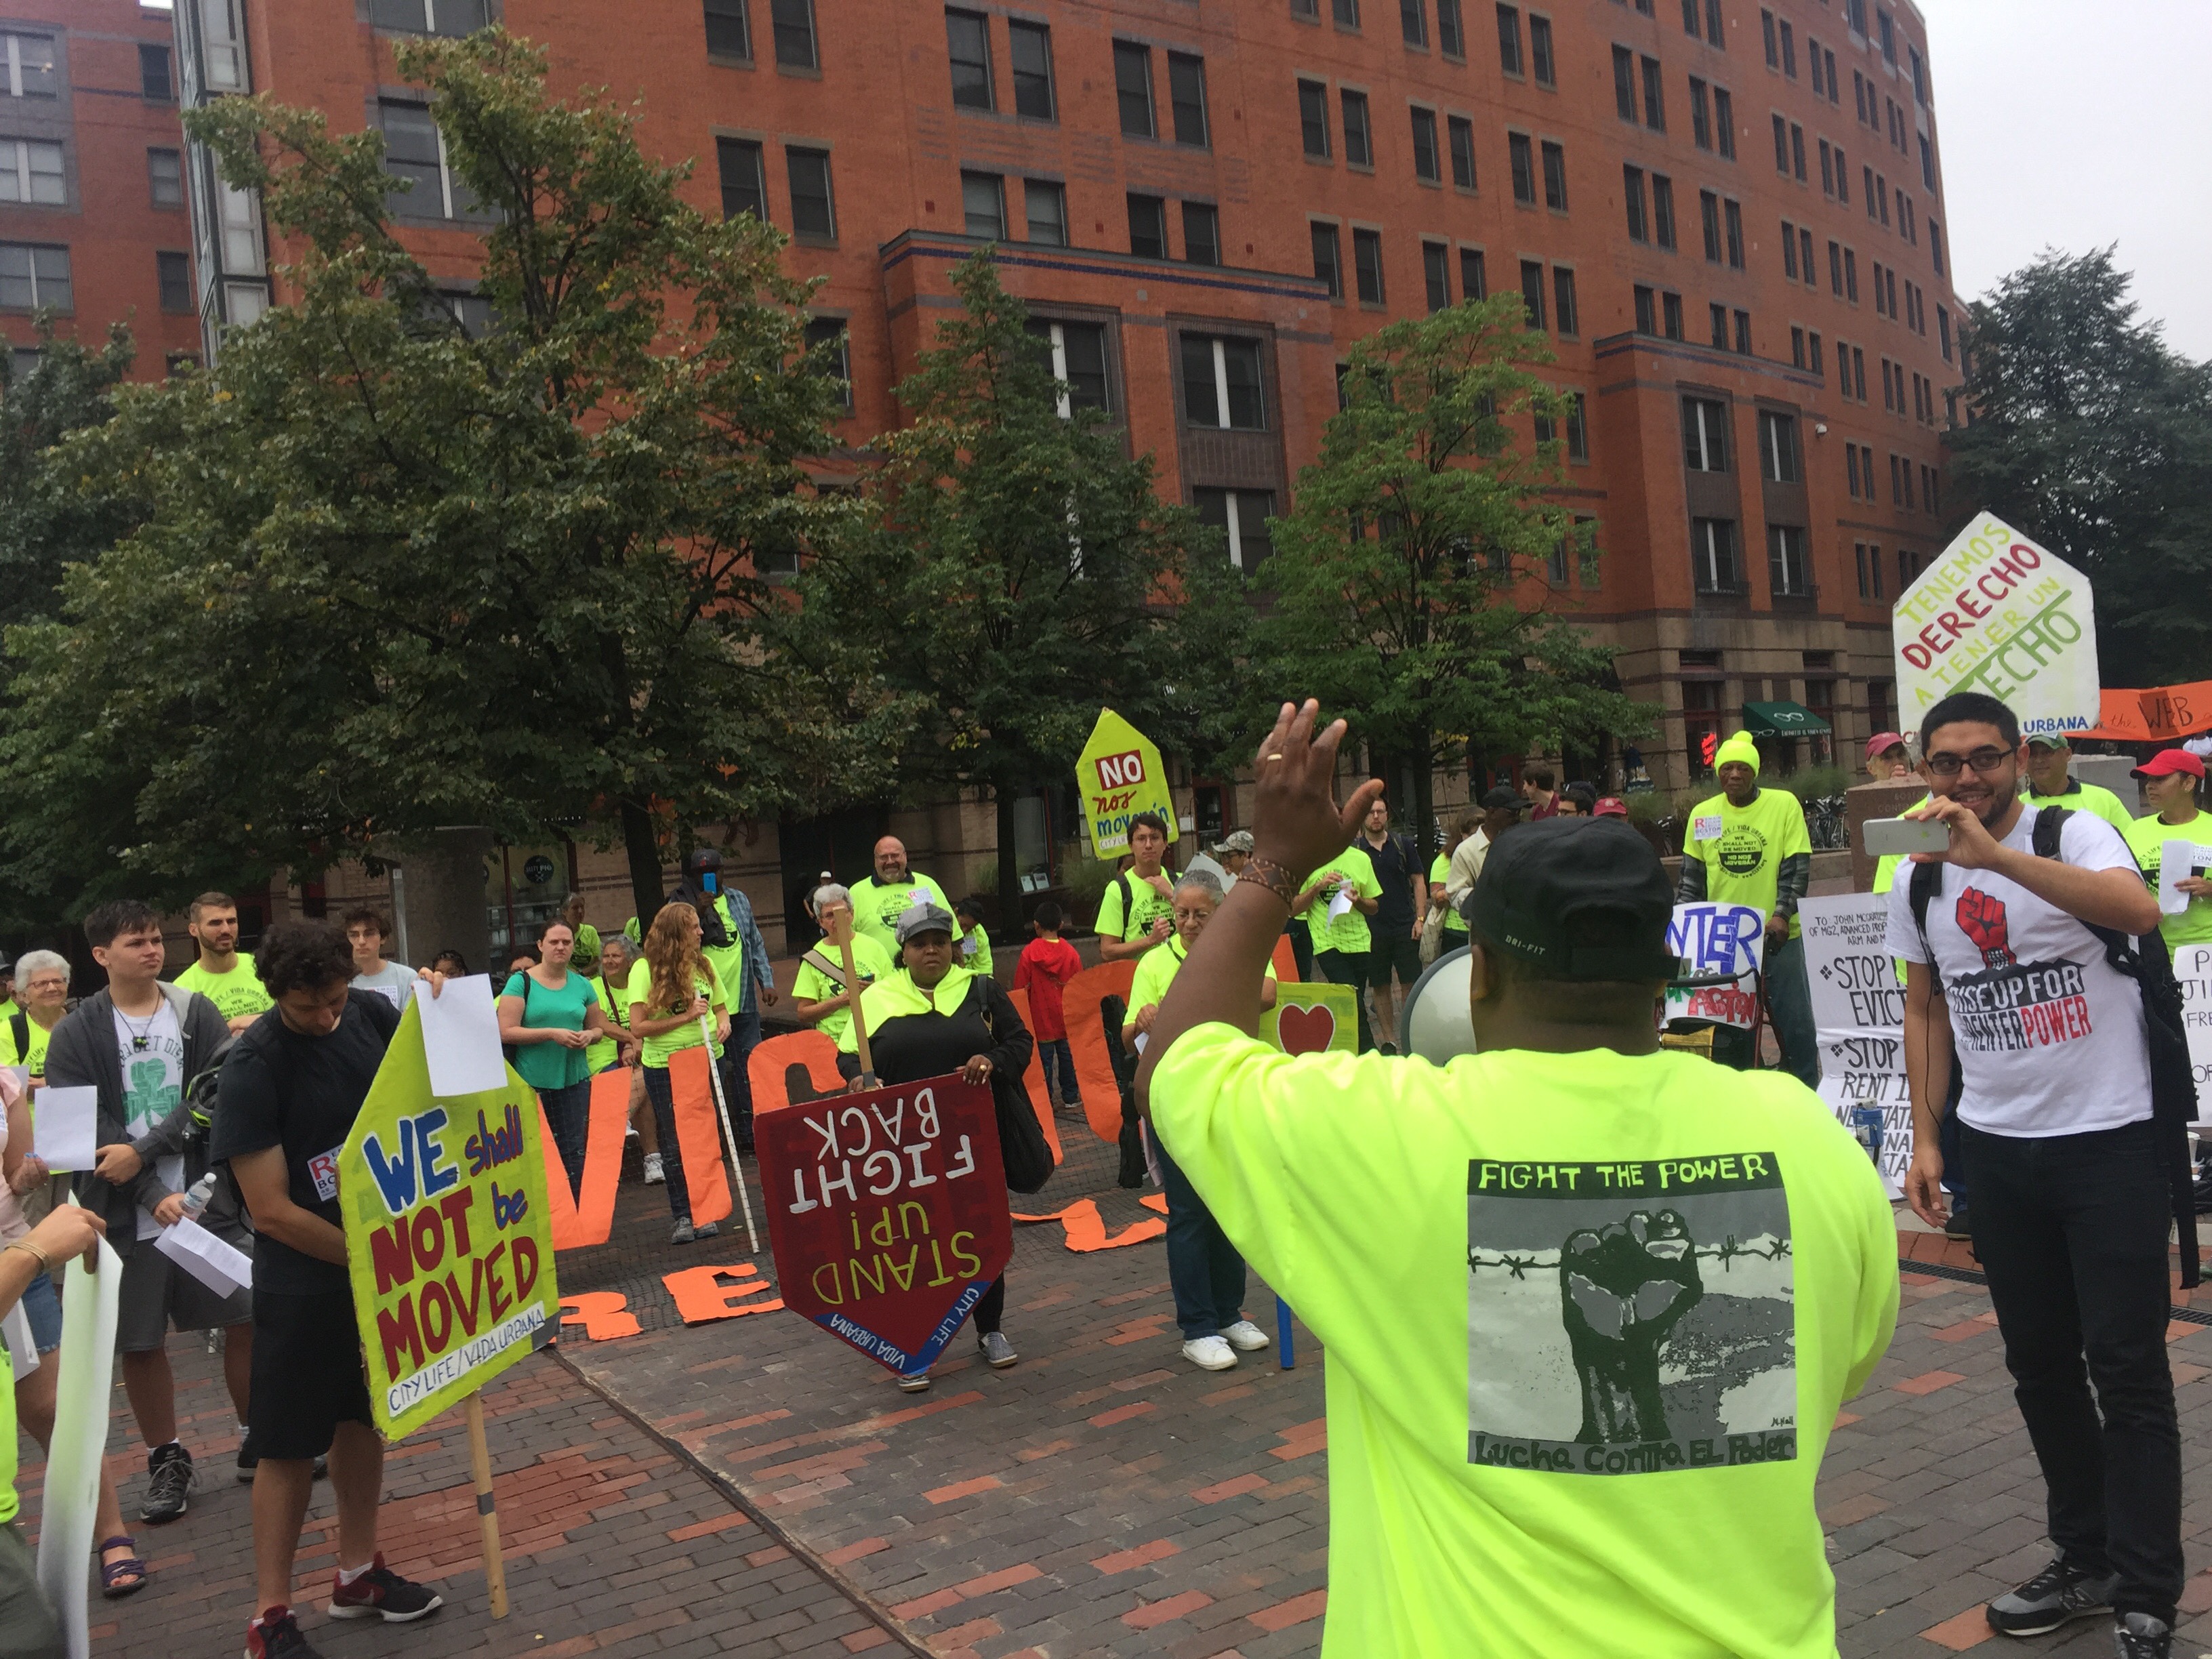 Boston puts Advanced Property Management on notice in kickoff to Renters’ Week of Action